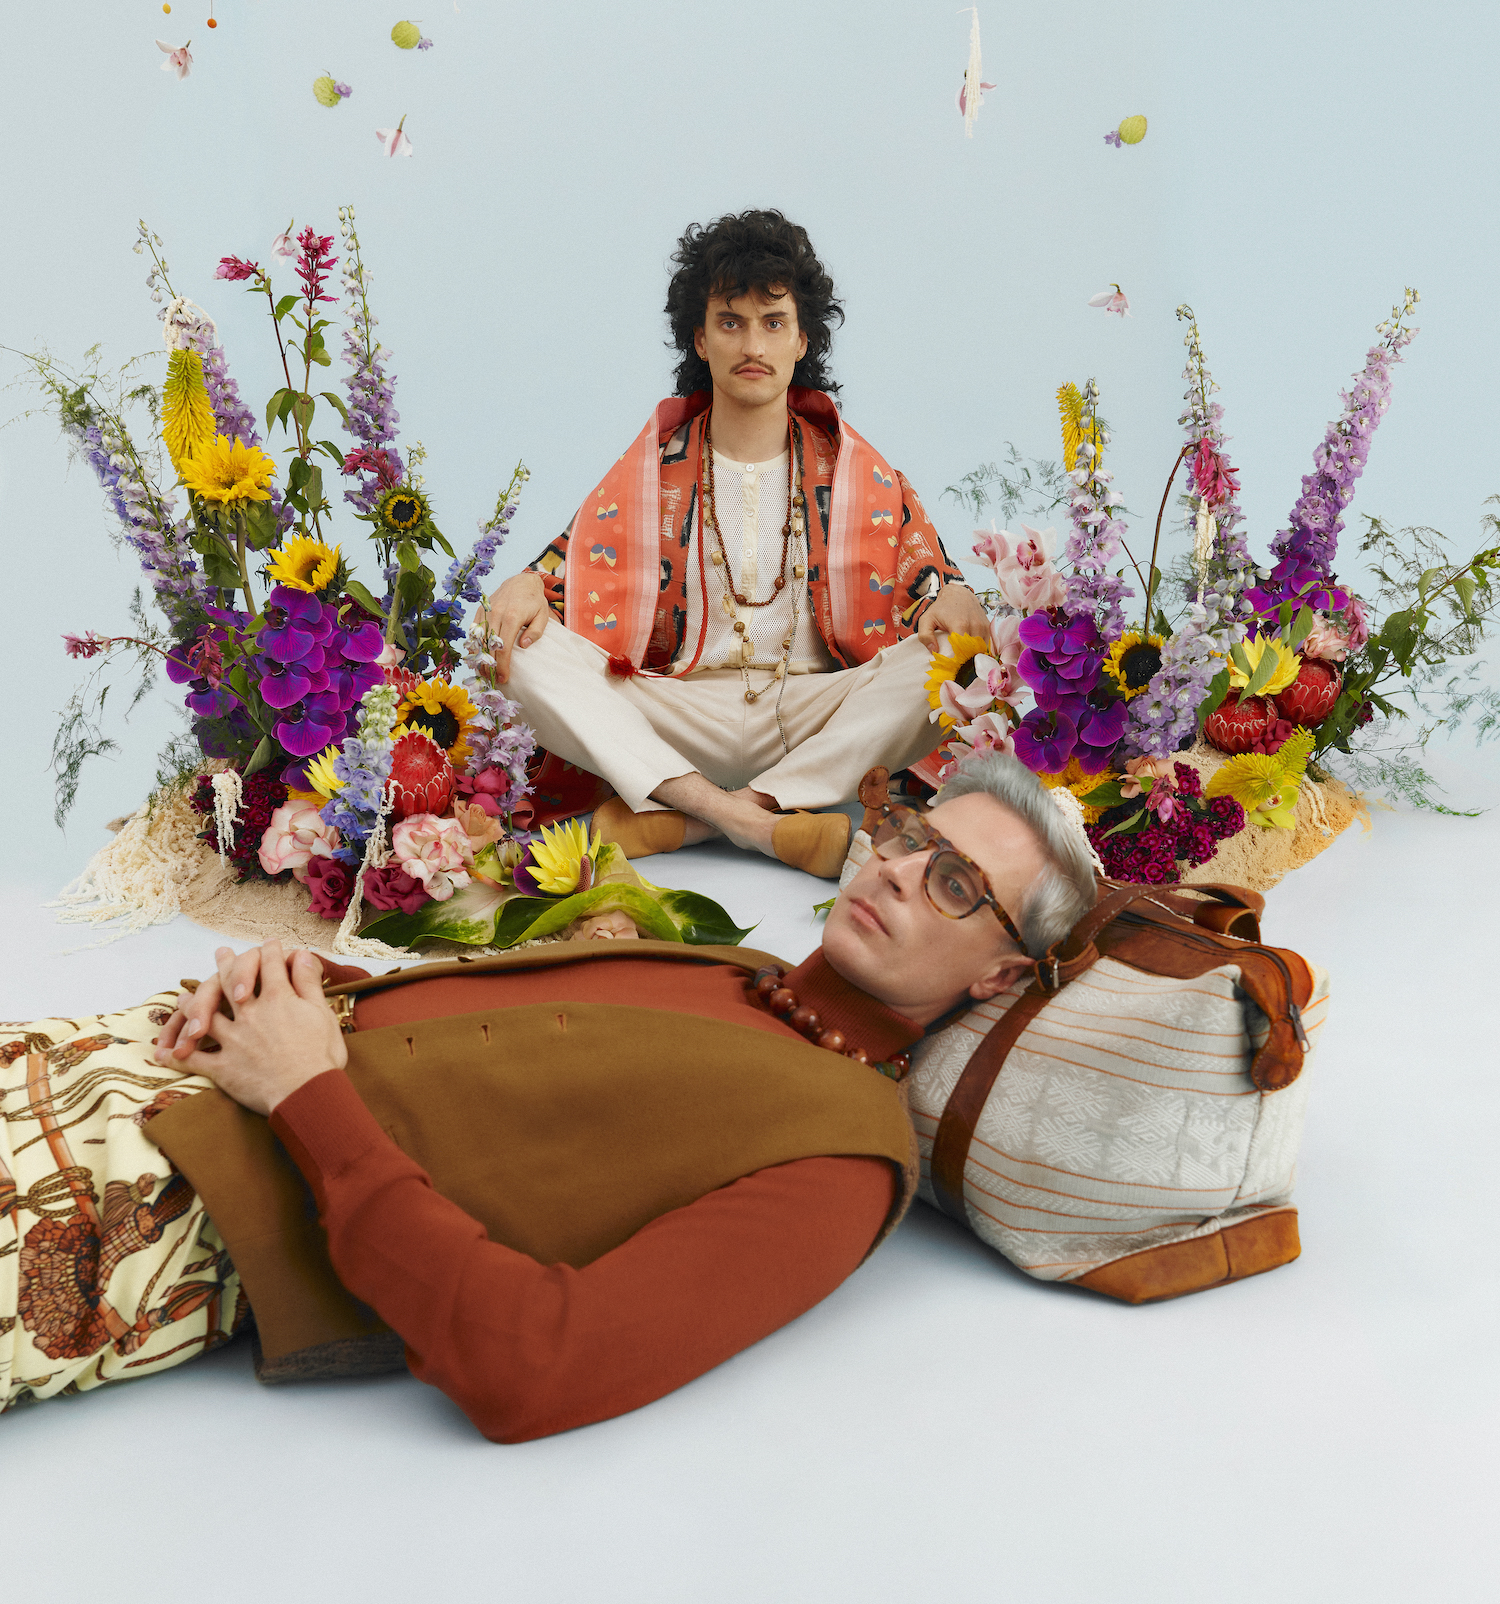 A photo of two men surrounded by flowers and wearing 70s-inspired outfits.